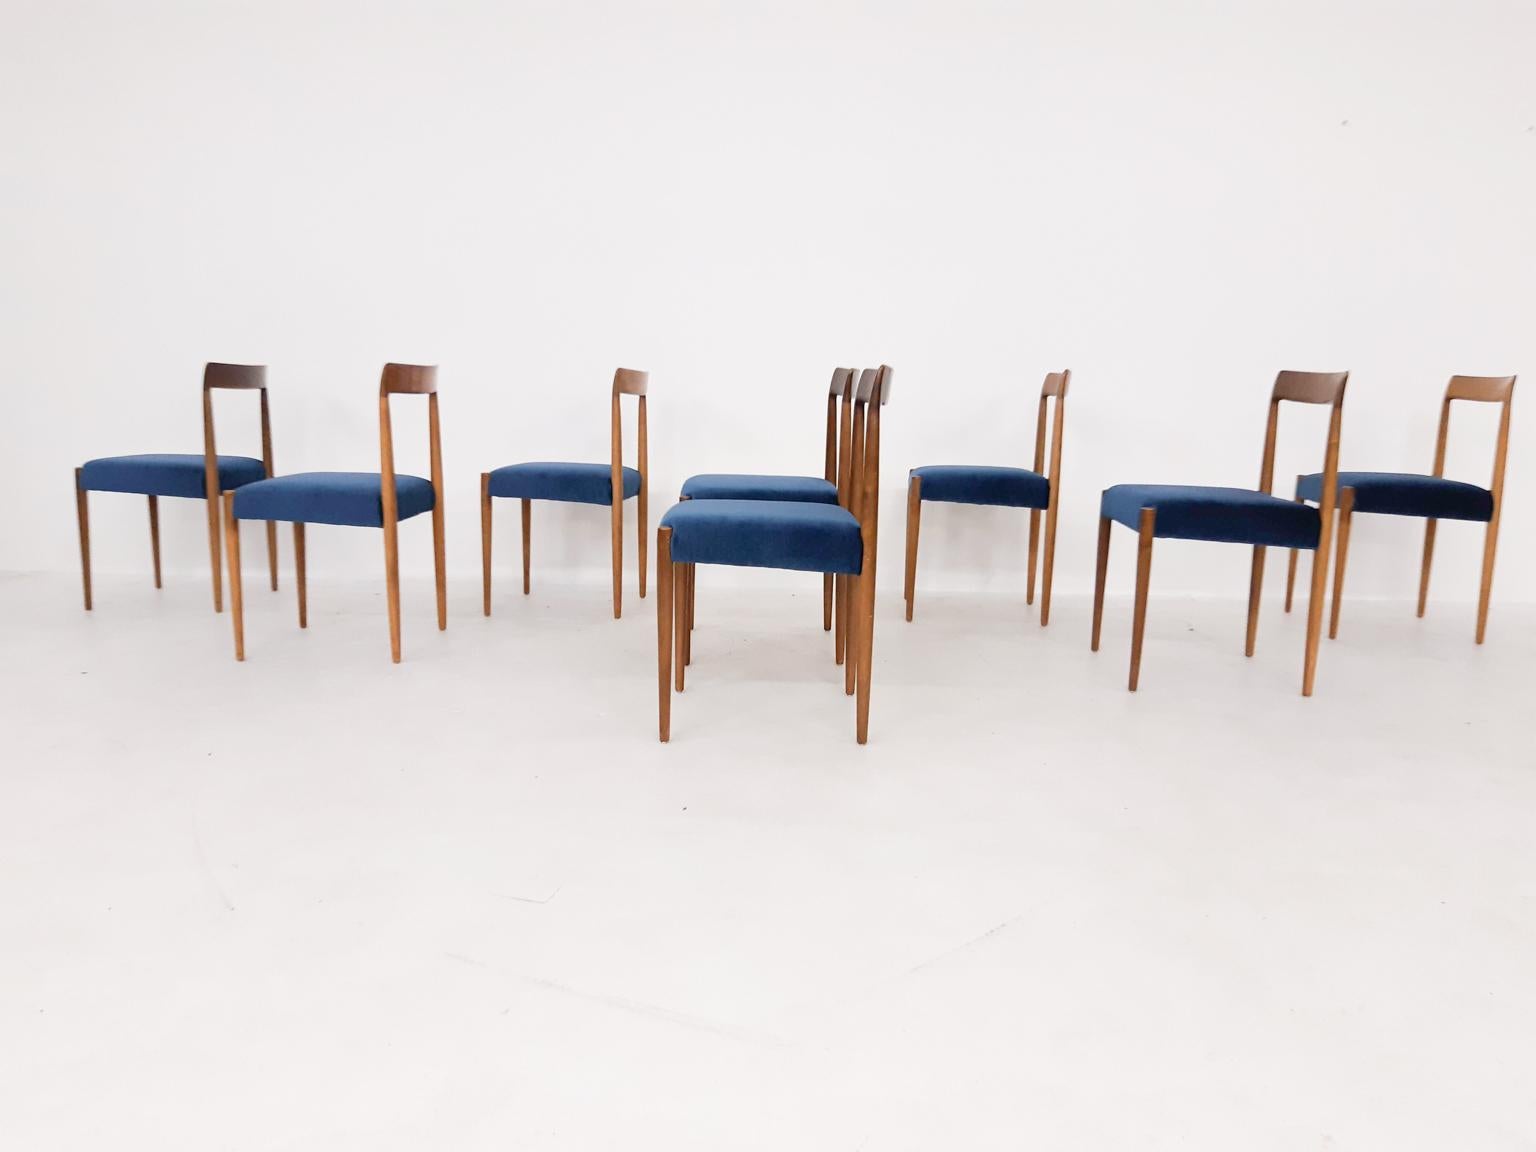 Set of 8 midcentury teak dining chairs by Lubke. Made in Germany in the 1960s.

In good condition with new petrol velvet upholstery.

Lubke was a German midcentury furniture producer. Heavily influenced by Danish designer like Niels Otto Moller,